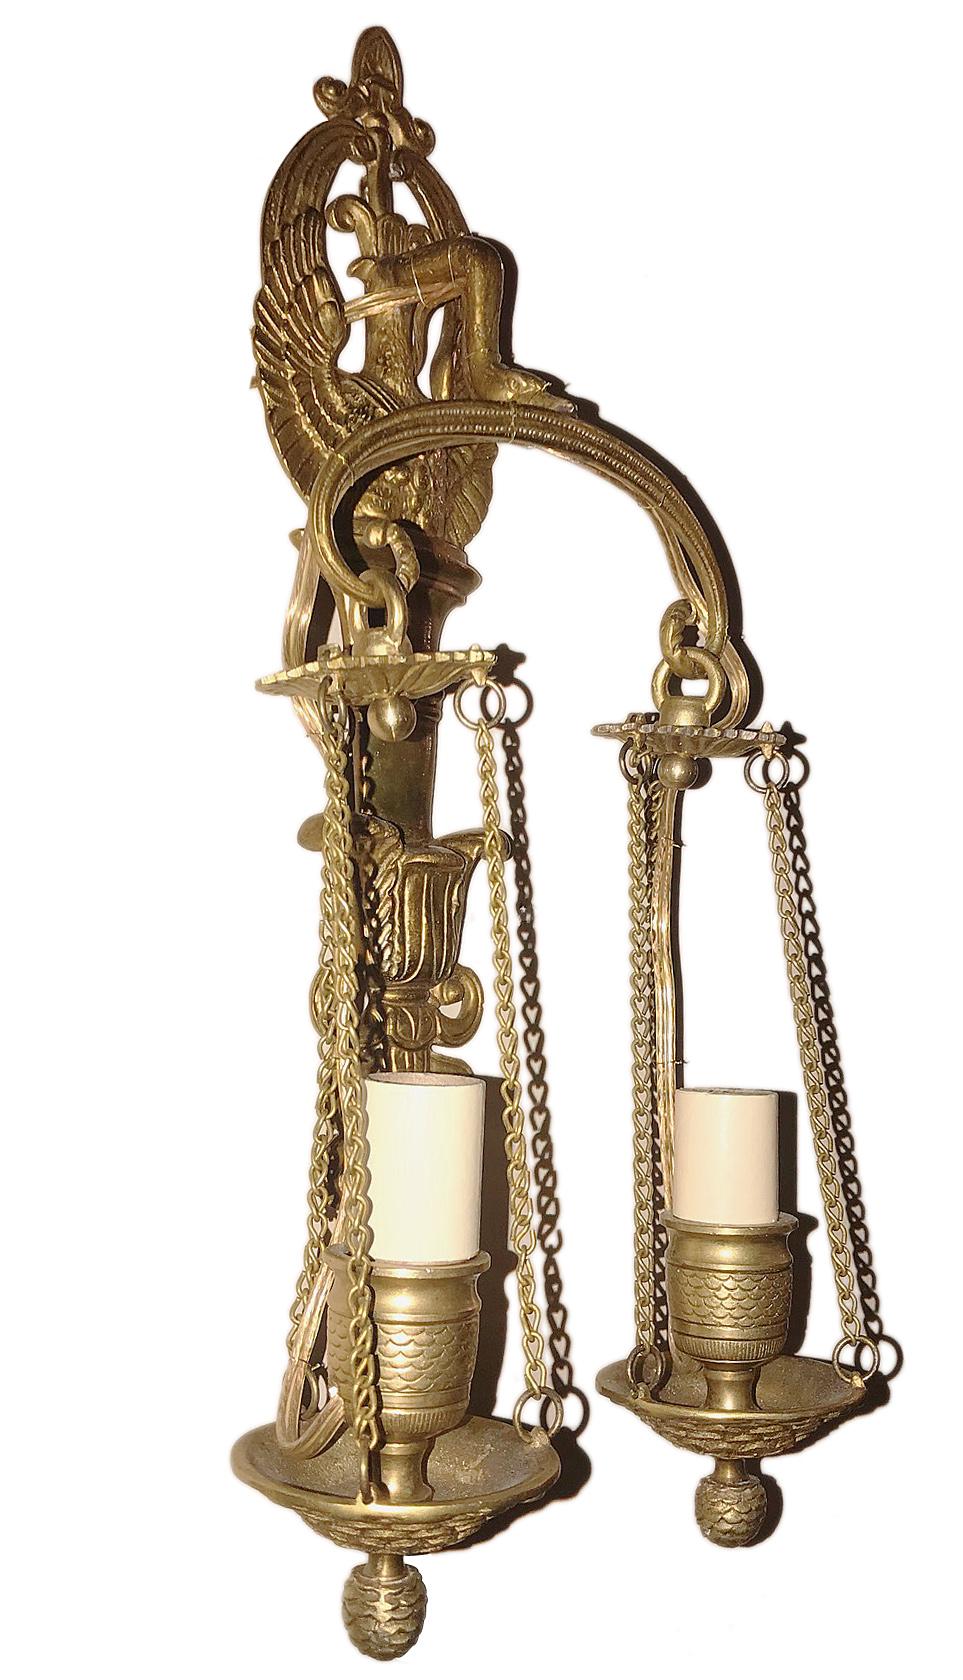 Pair of French circa 1900s two-arm sconces with swan motif and gilt finish.

Measurements:
Height 13